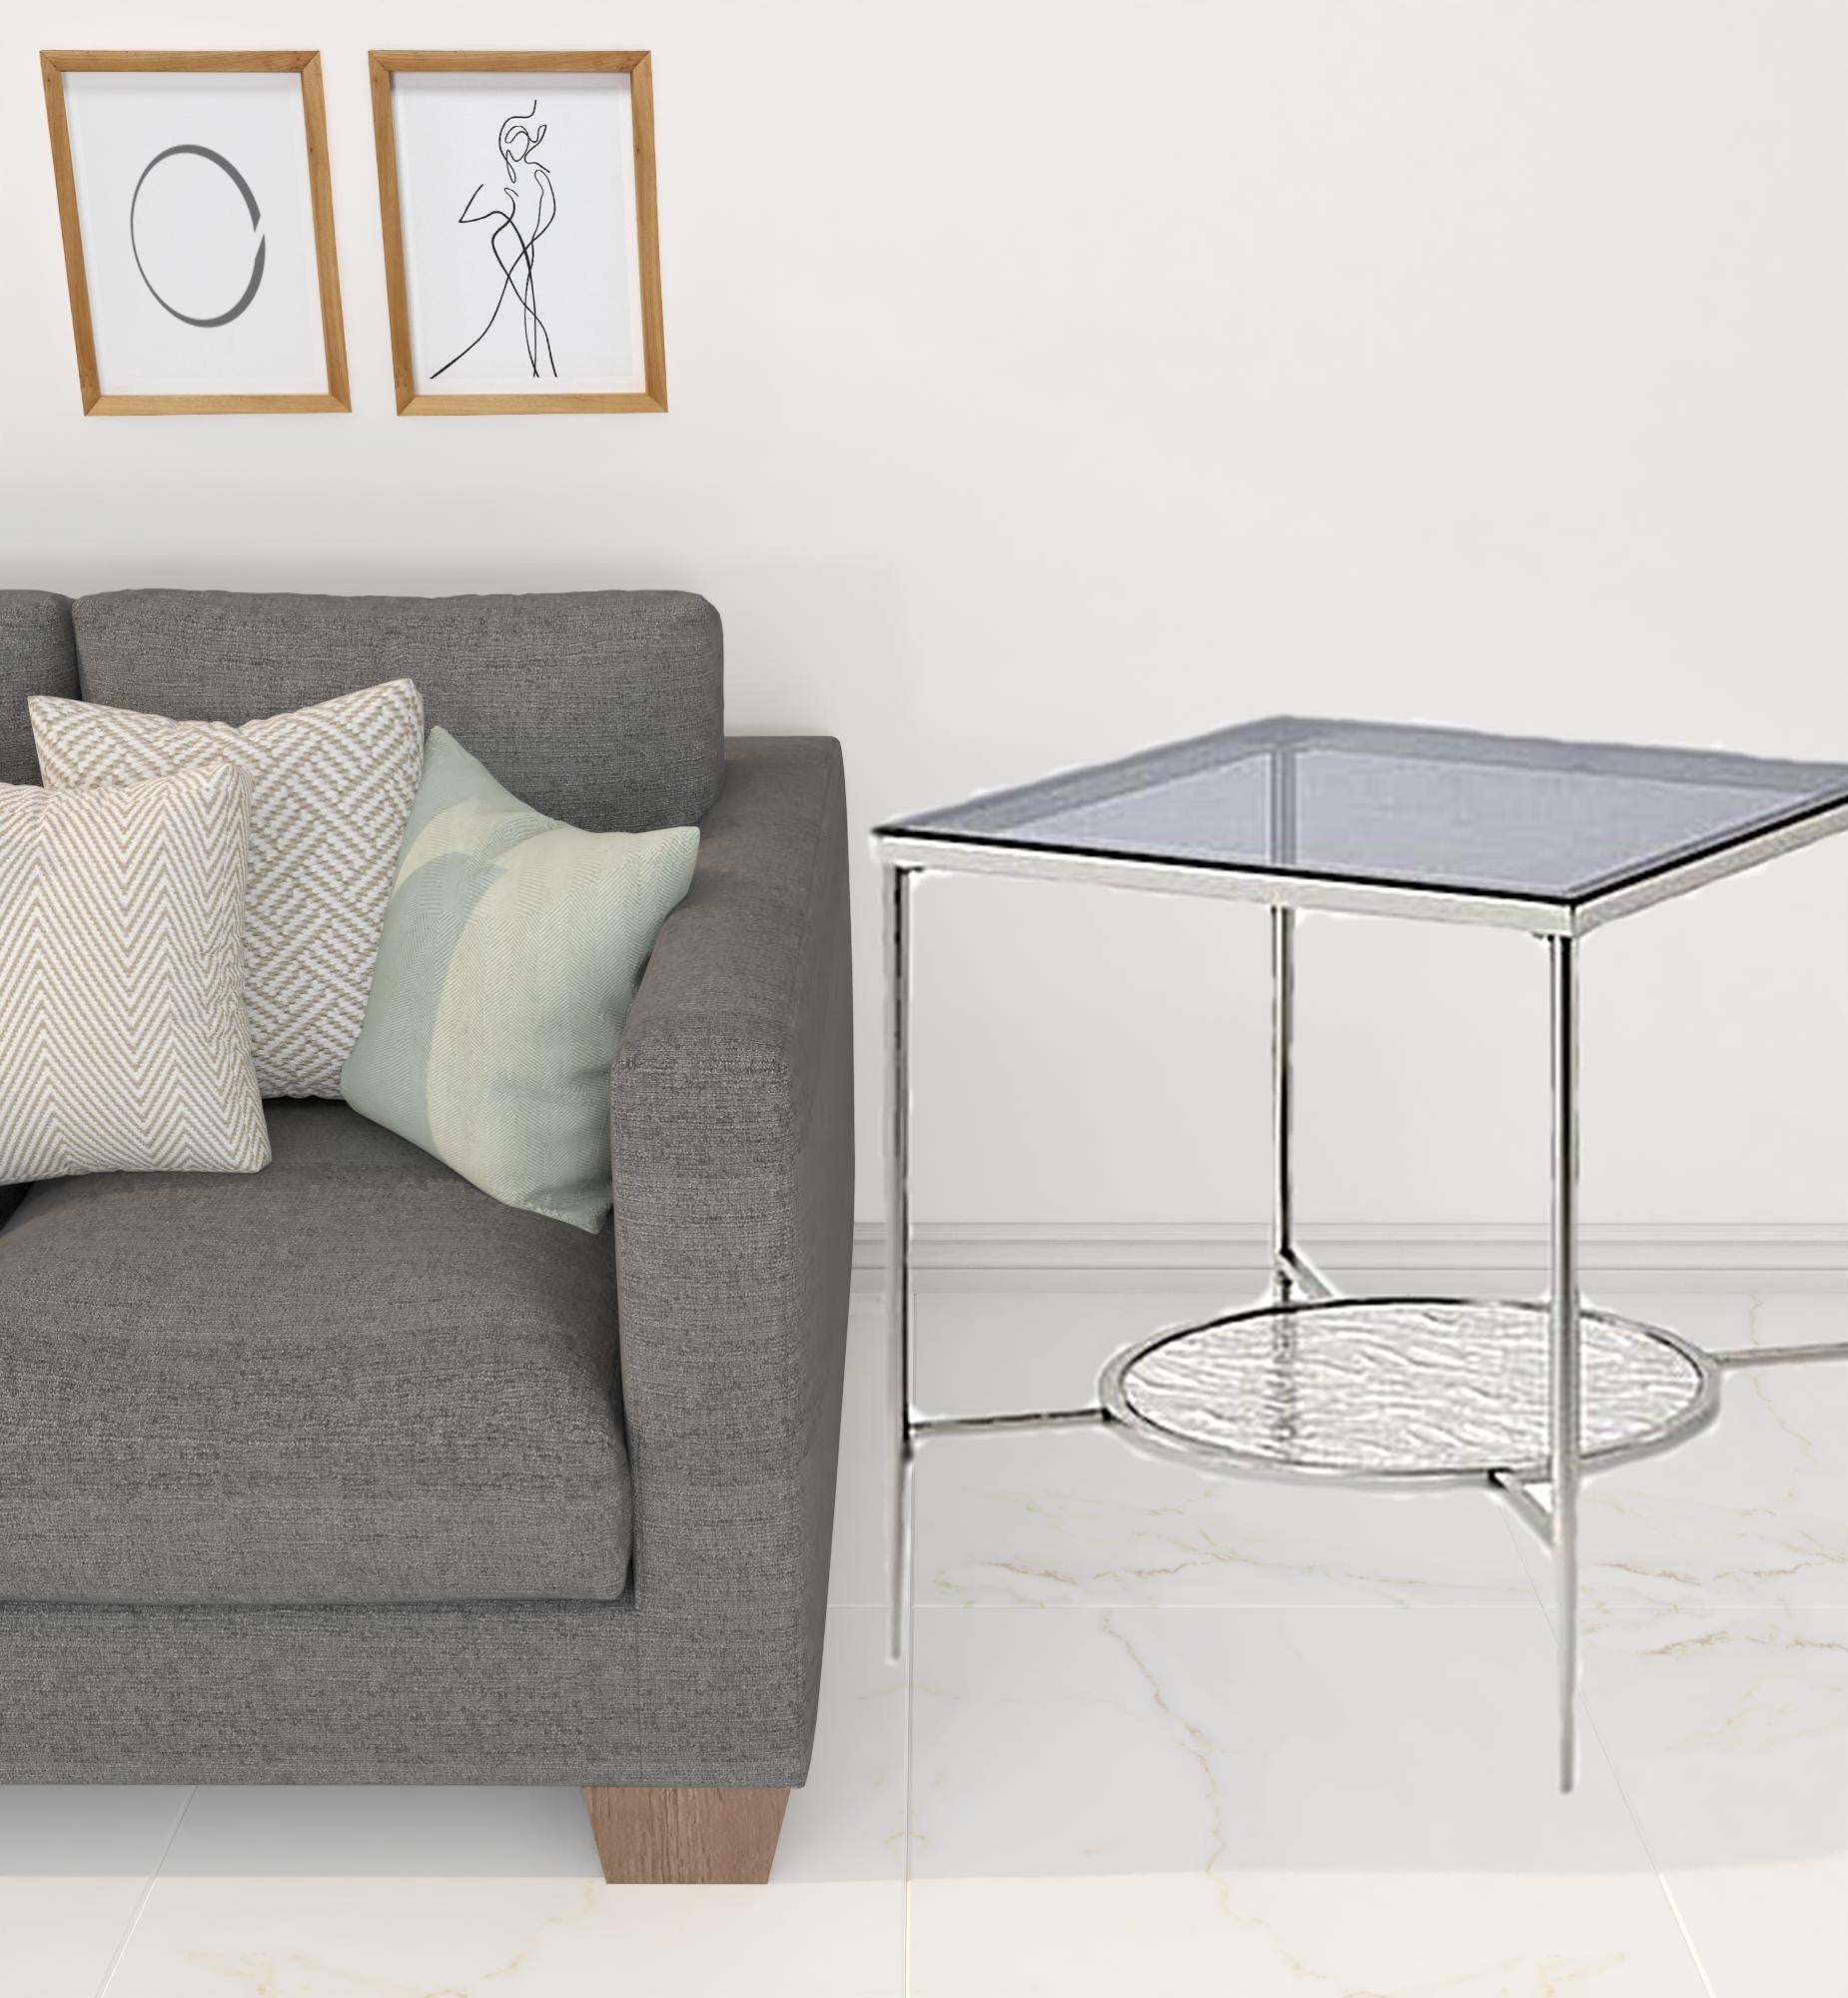 24" Chrome And Clear Glass And Metal Square End Table With Shelf